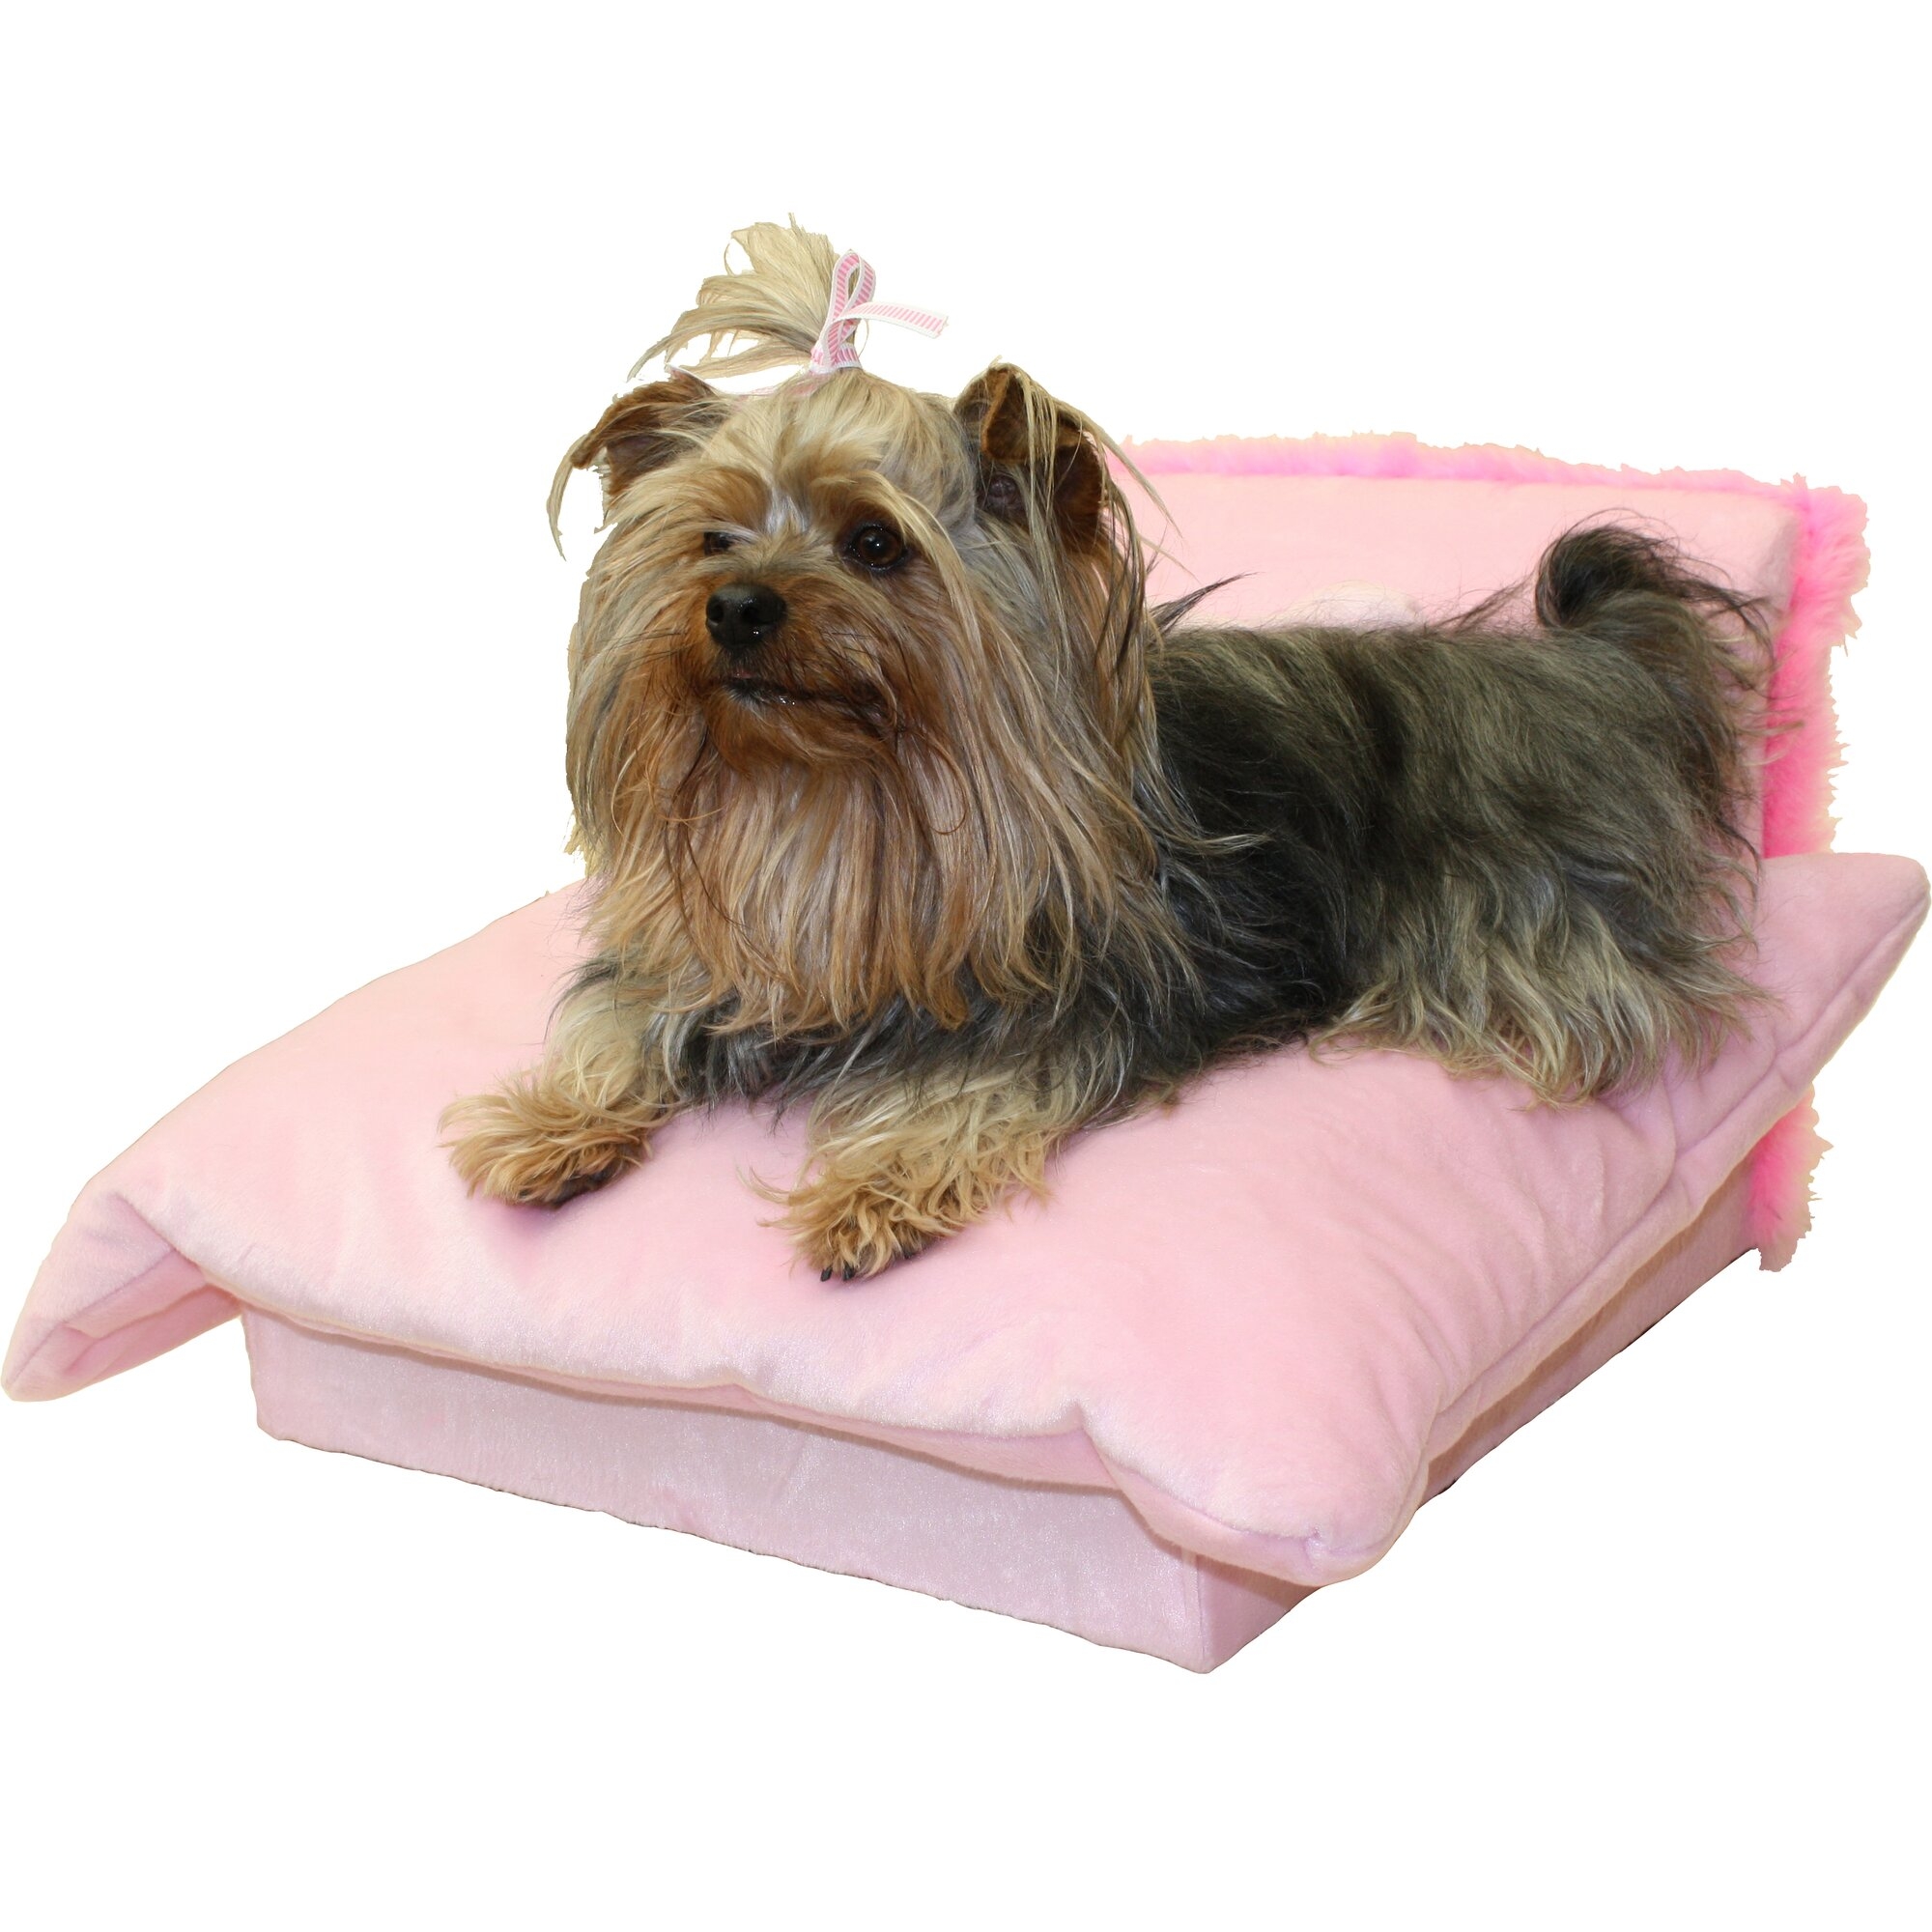 Dog beds that look like couches